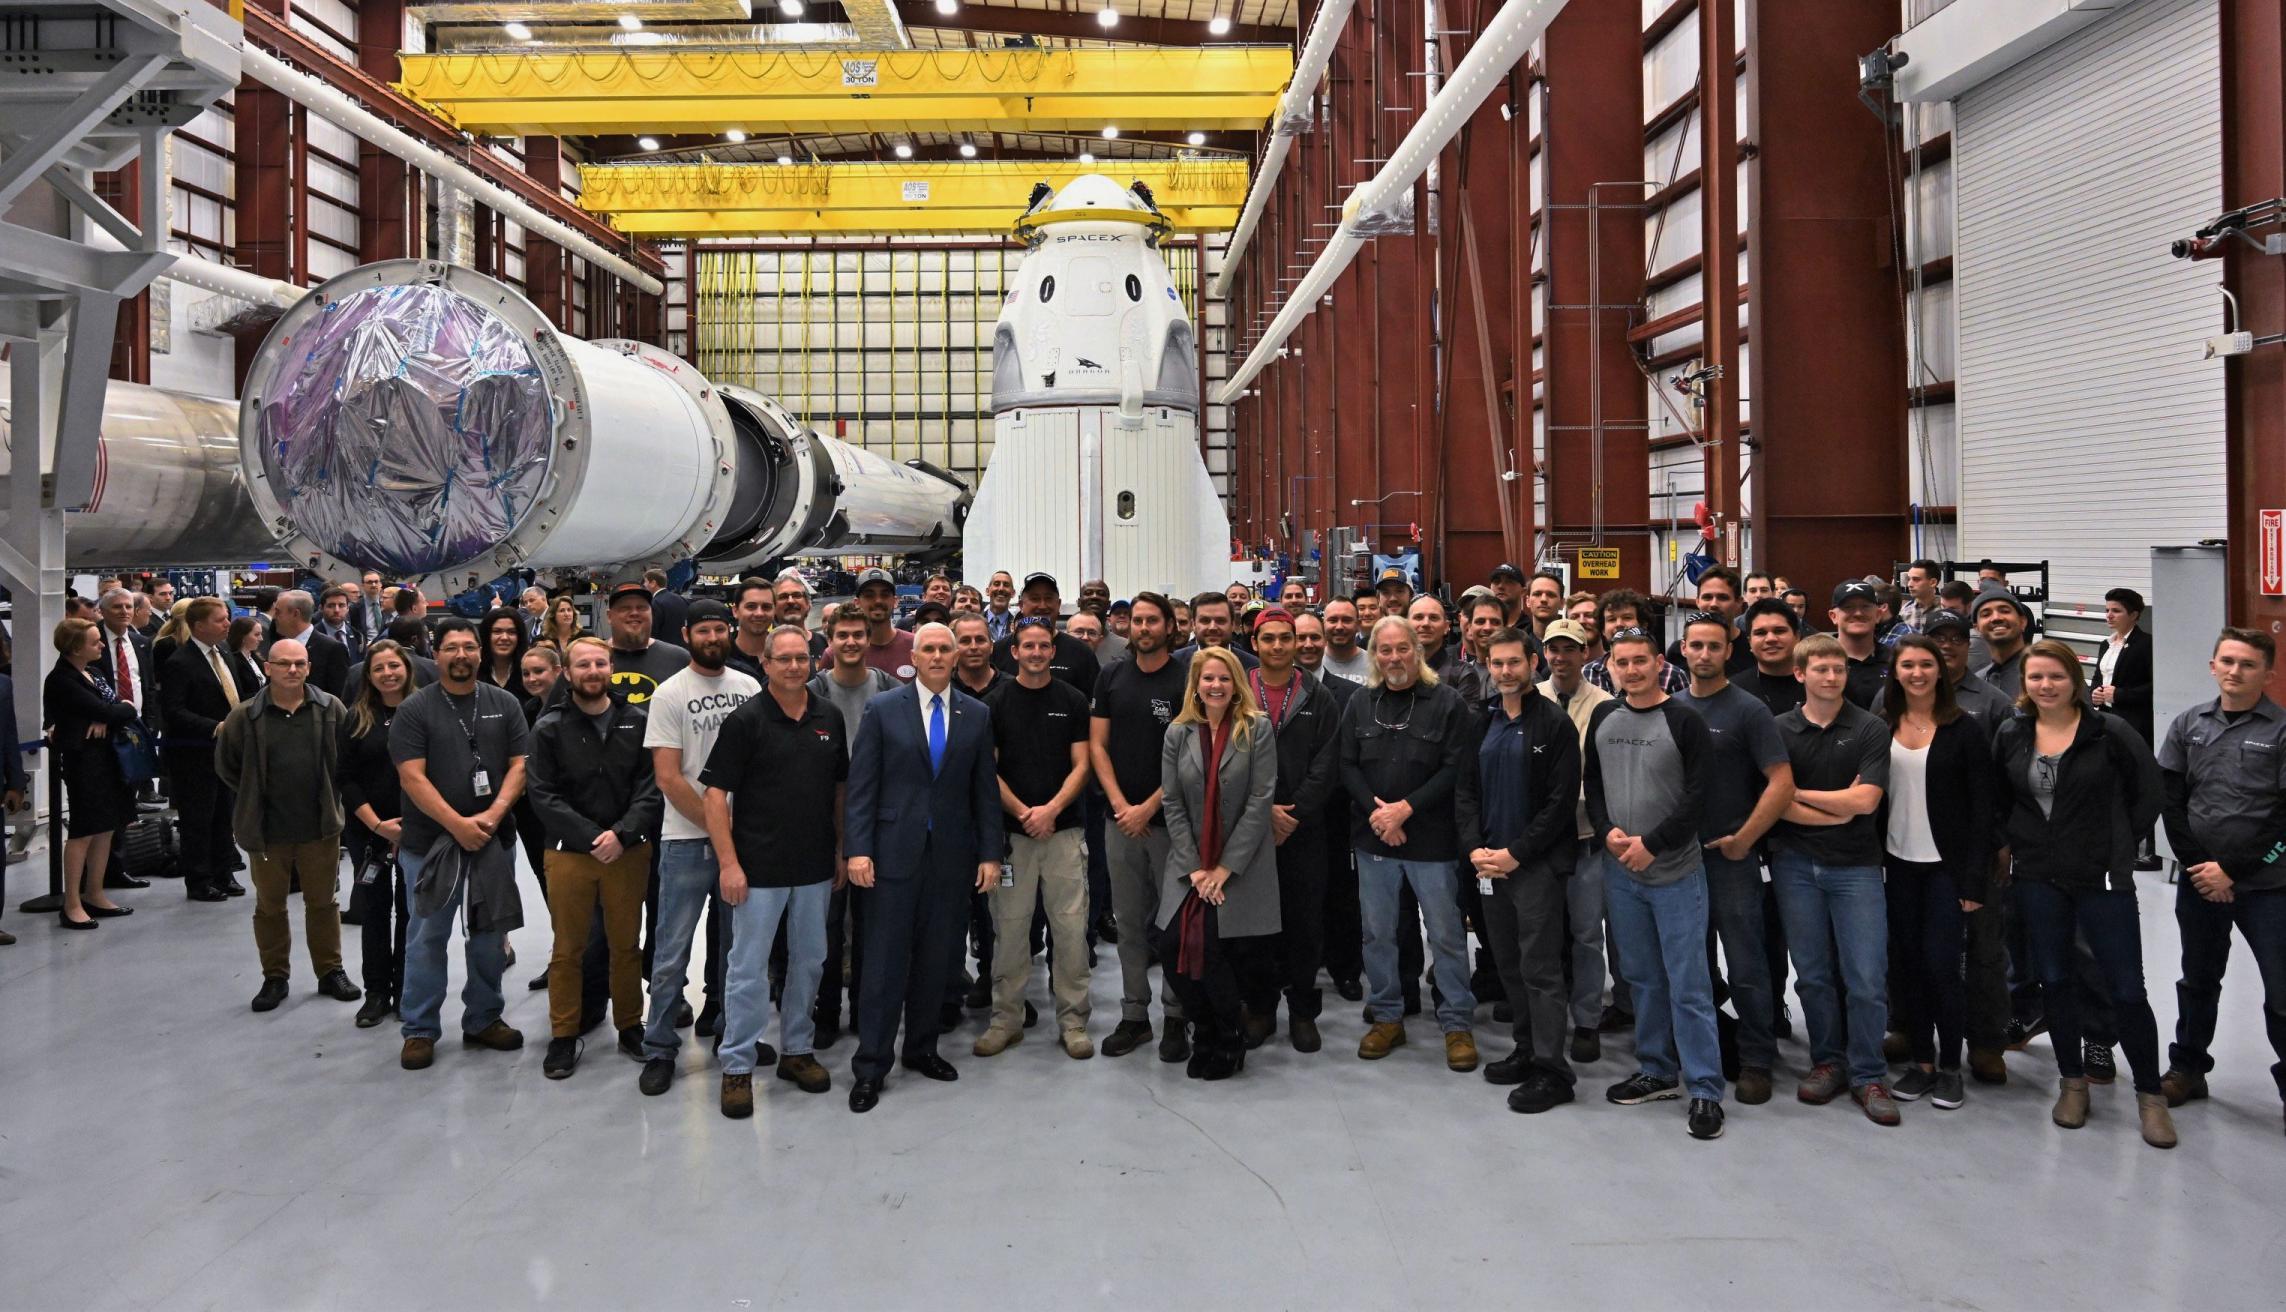 Crew Dragon DM-1 and Falcon 9 B1051 39A employees (SpaceX)2(c)